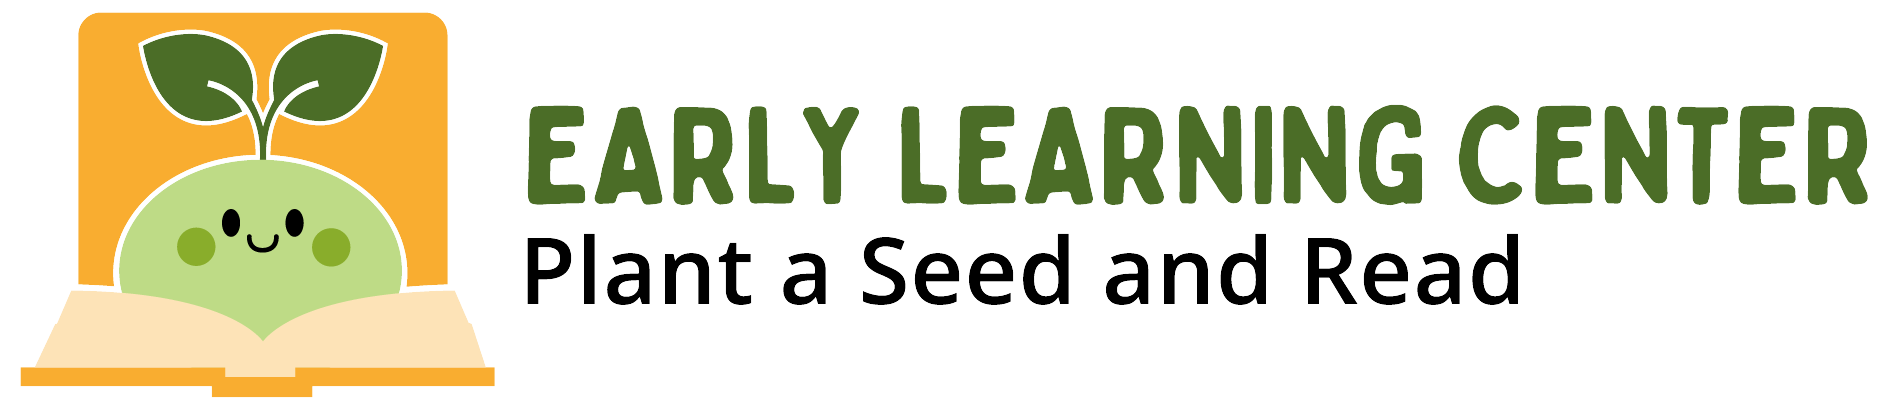 Early Learning Center logo